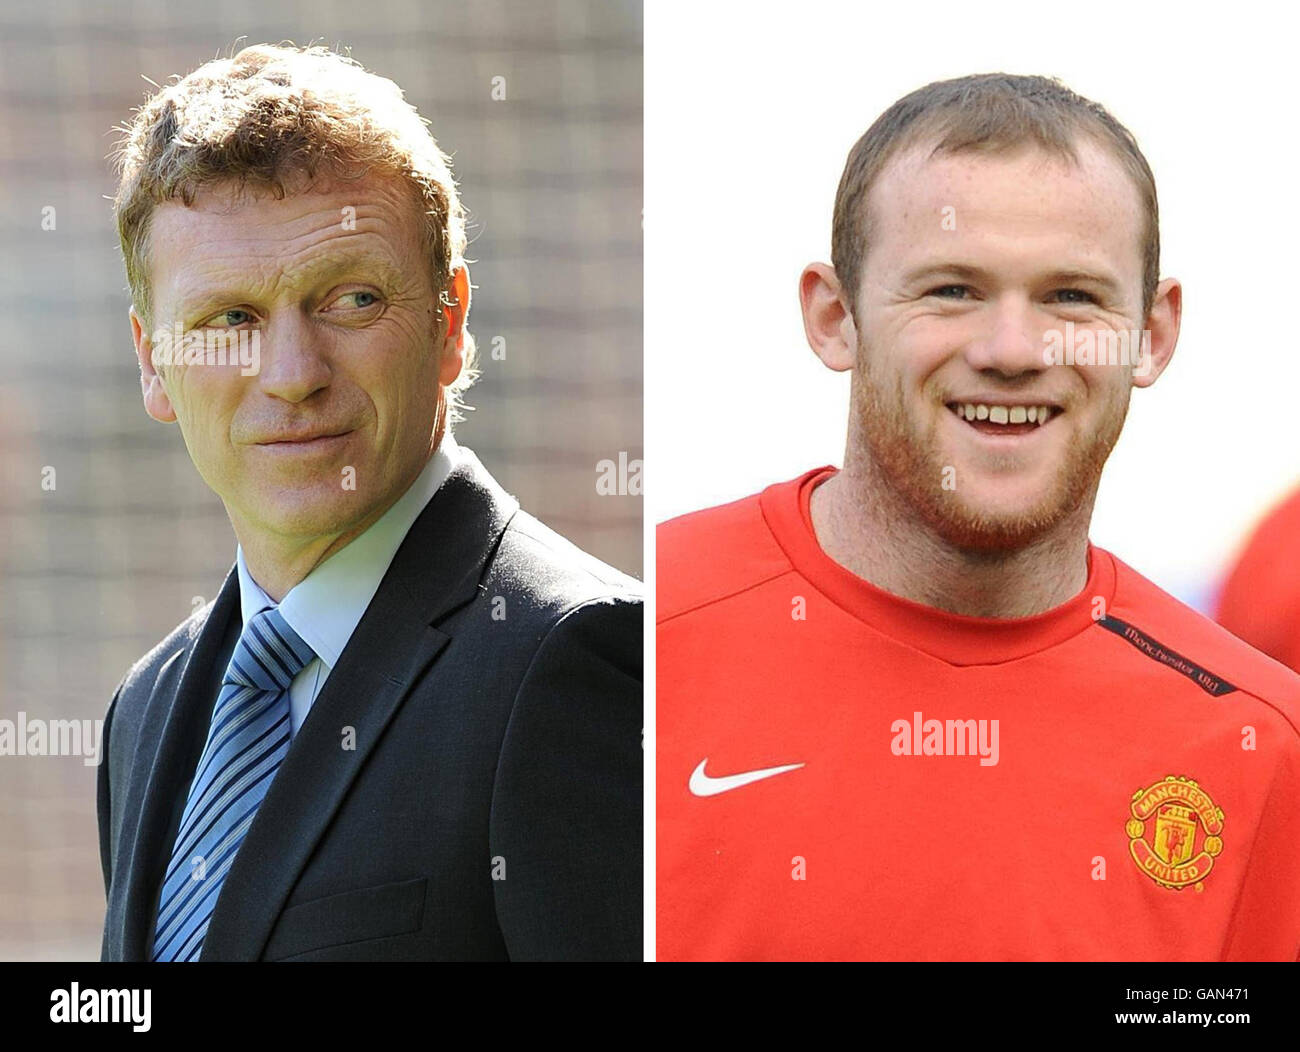 Undated file photos of Everton manager David Moyes and Manchester United footballer Wayne Rooney. Premiership manager David Moyes has settled his libel action against Wayne Rooney, according to sources. Stock Photo